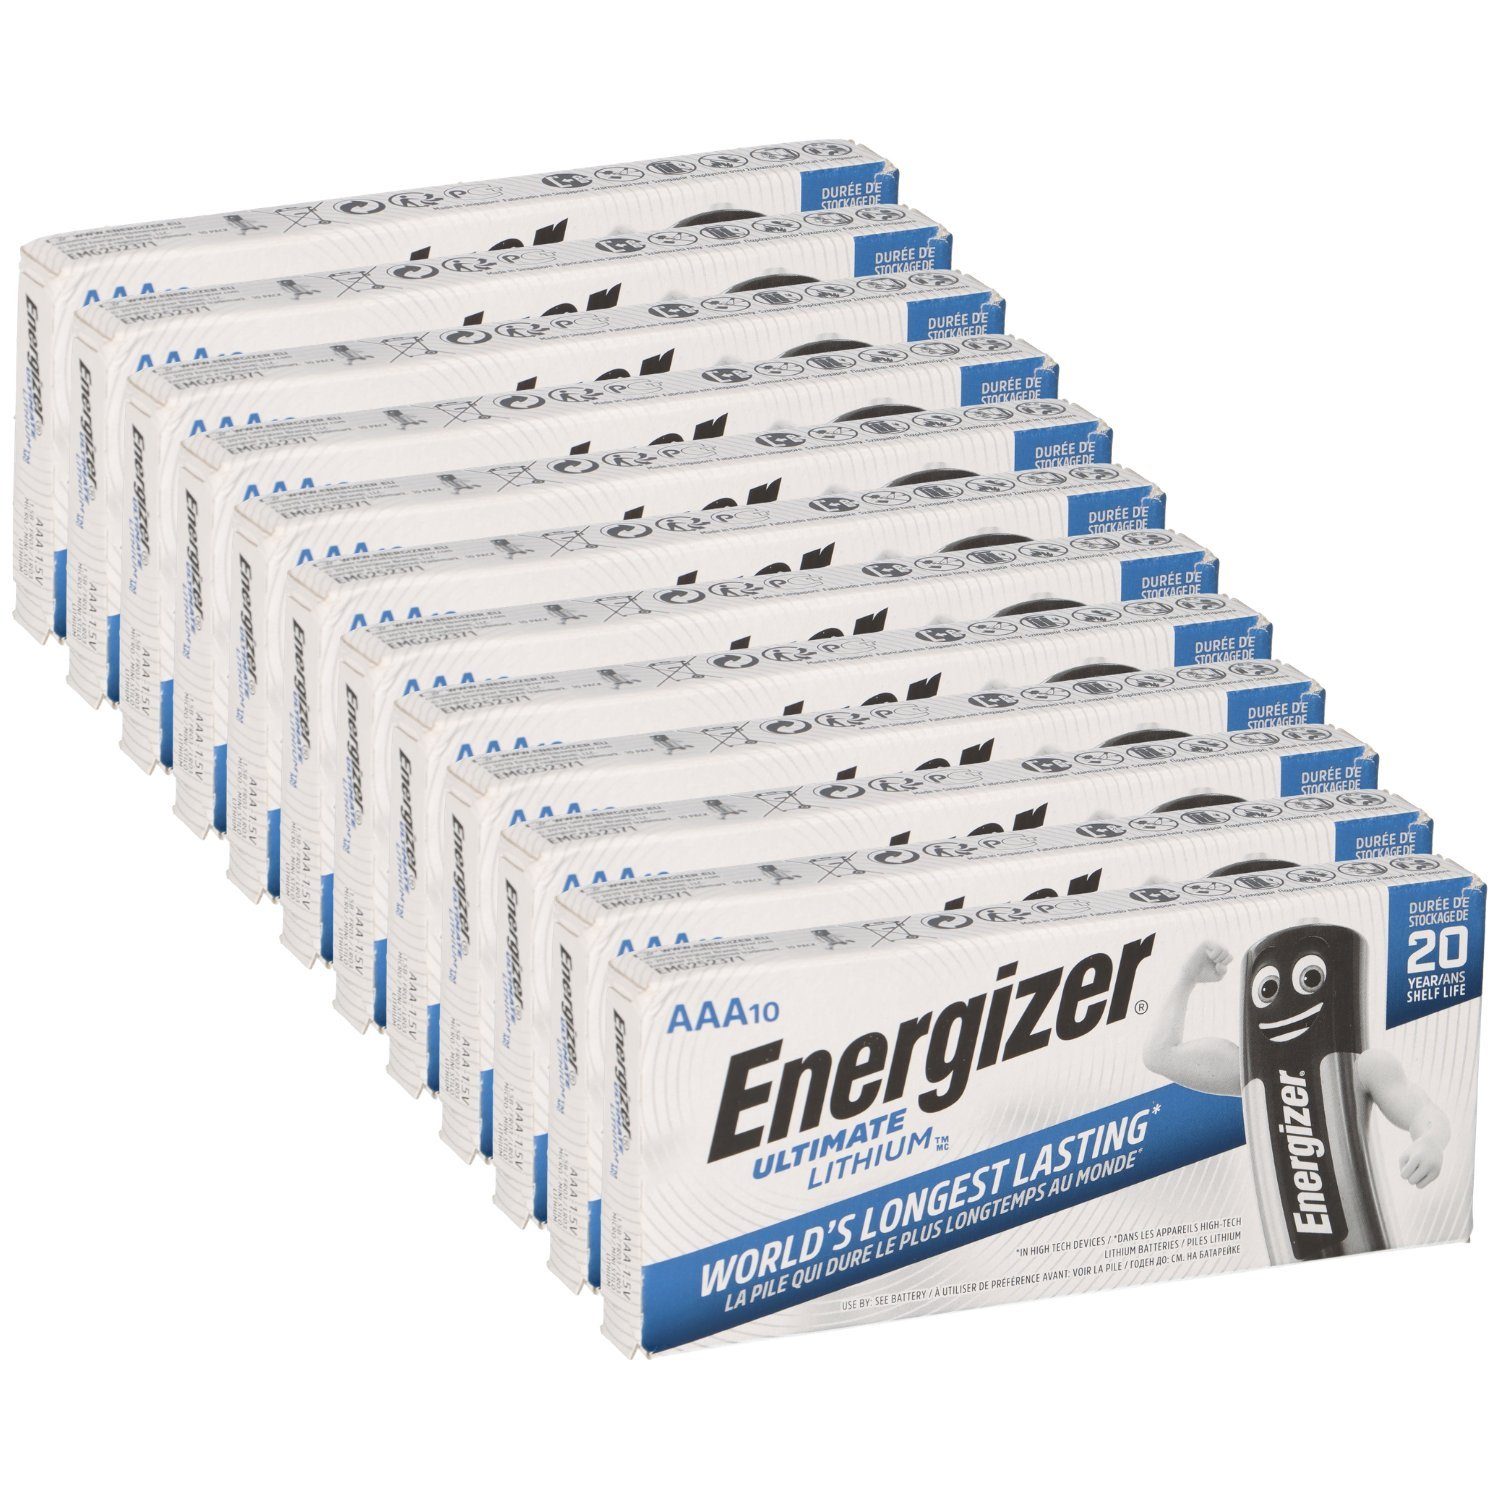 Energizer Energizer Batterie LR03 Batterie Lithium AAA L92 120x Ultimate Micro 1.5V